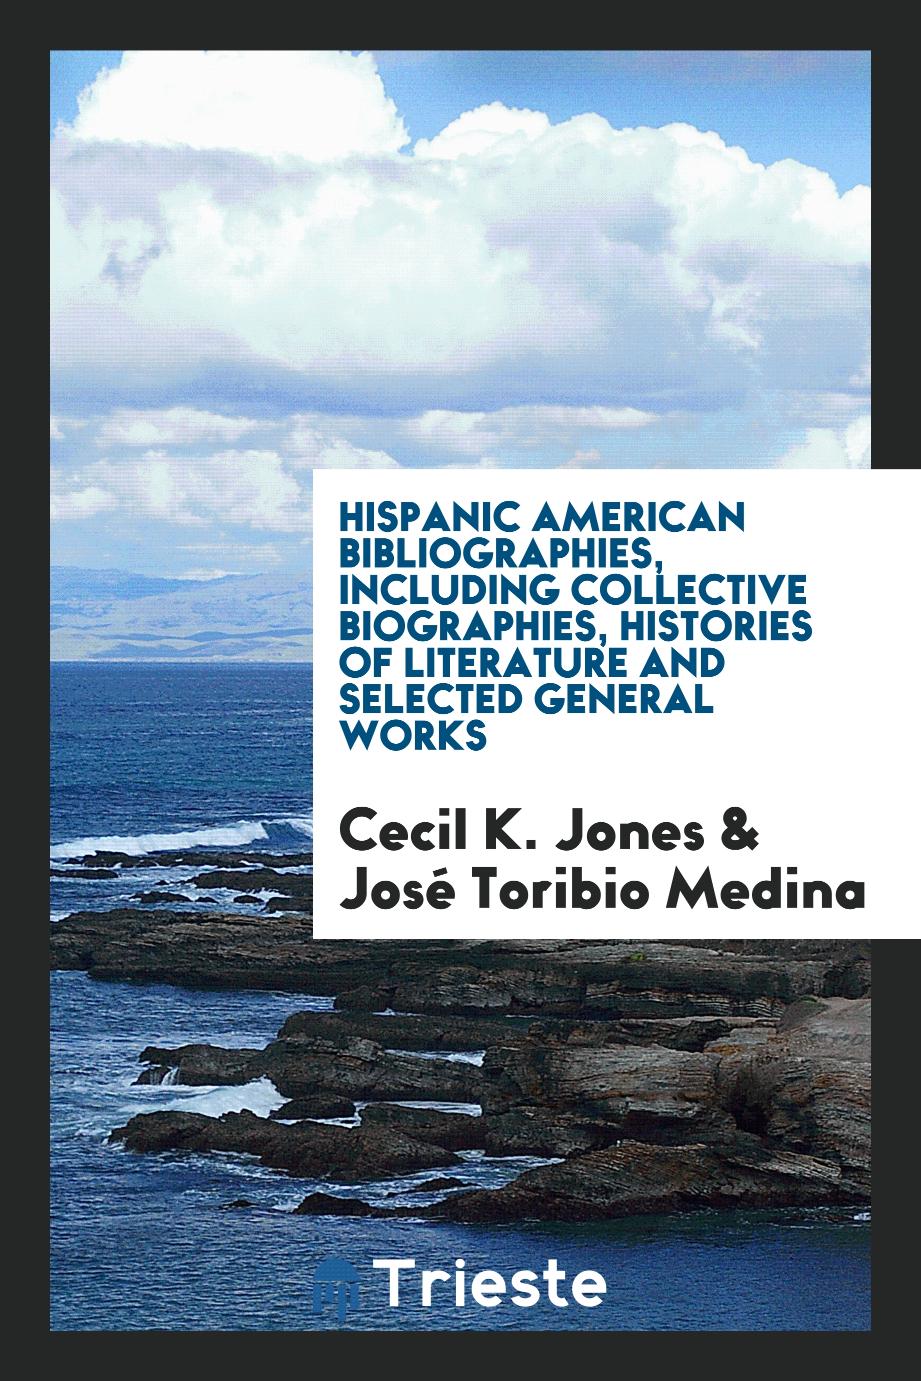 Hispanic American bibliographies, including collective biographies, histories of literature and selected general works